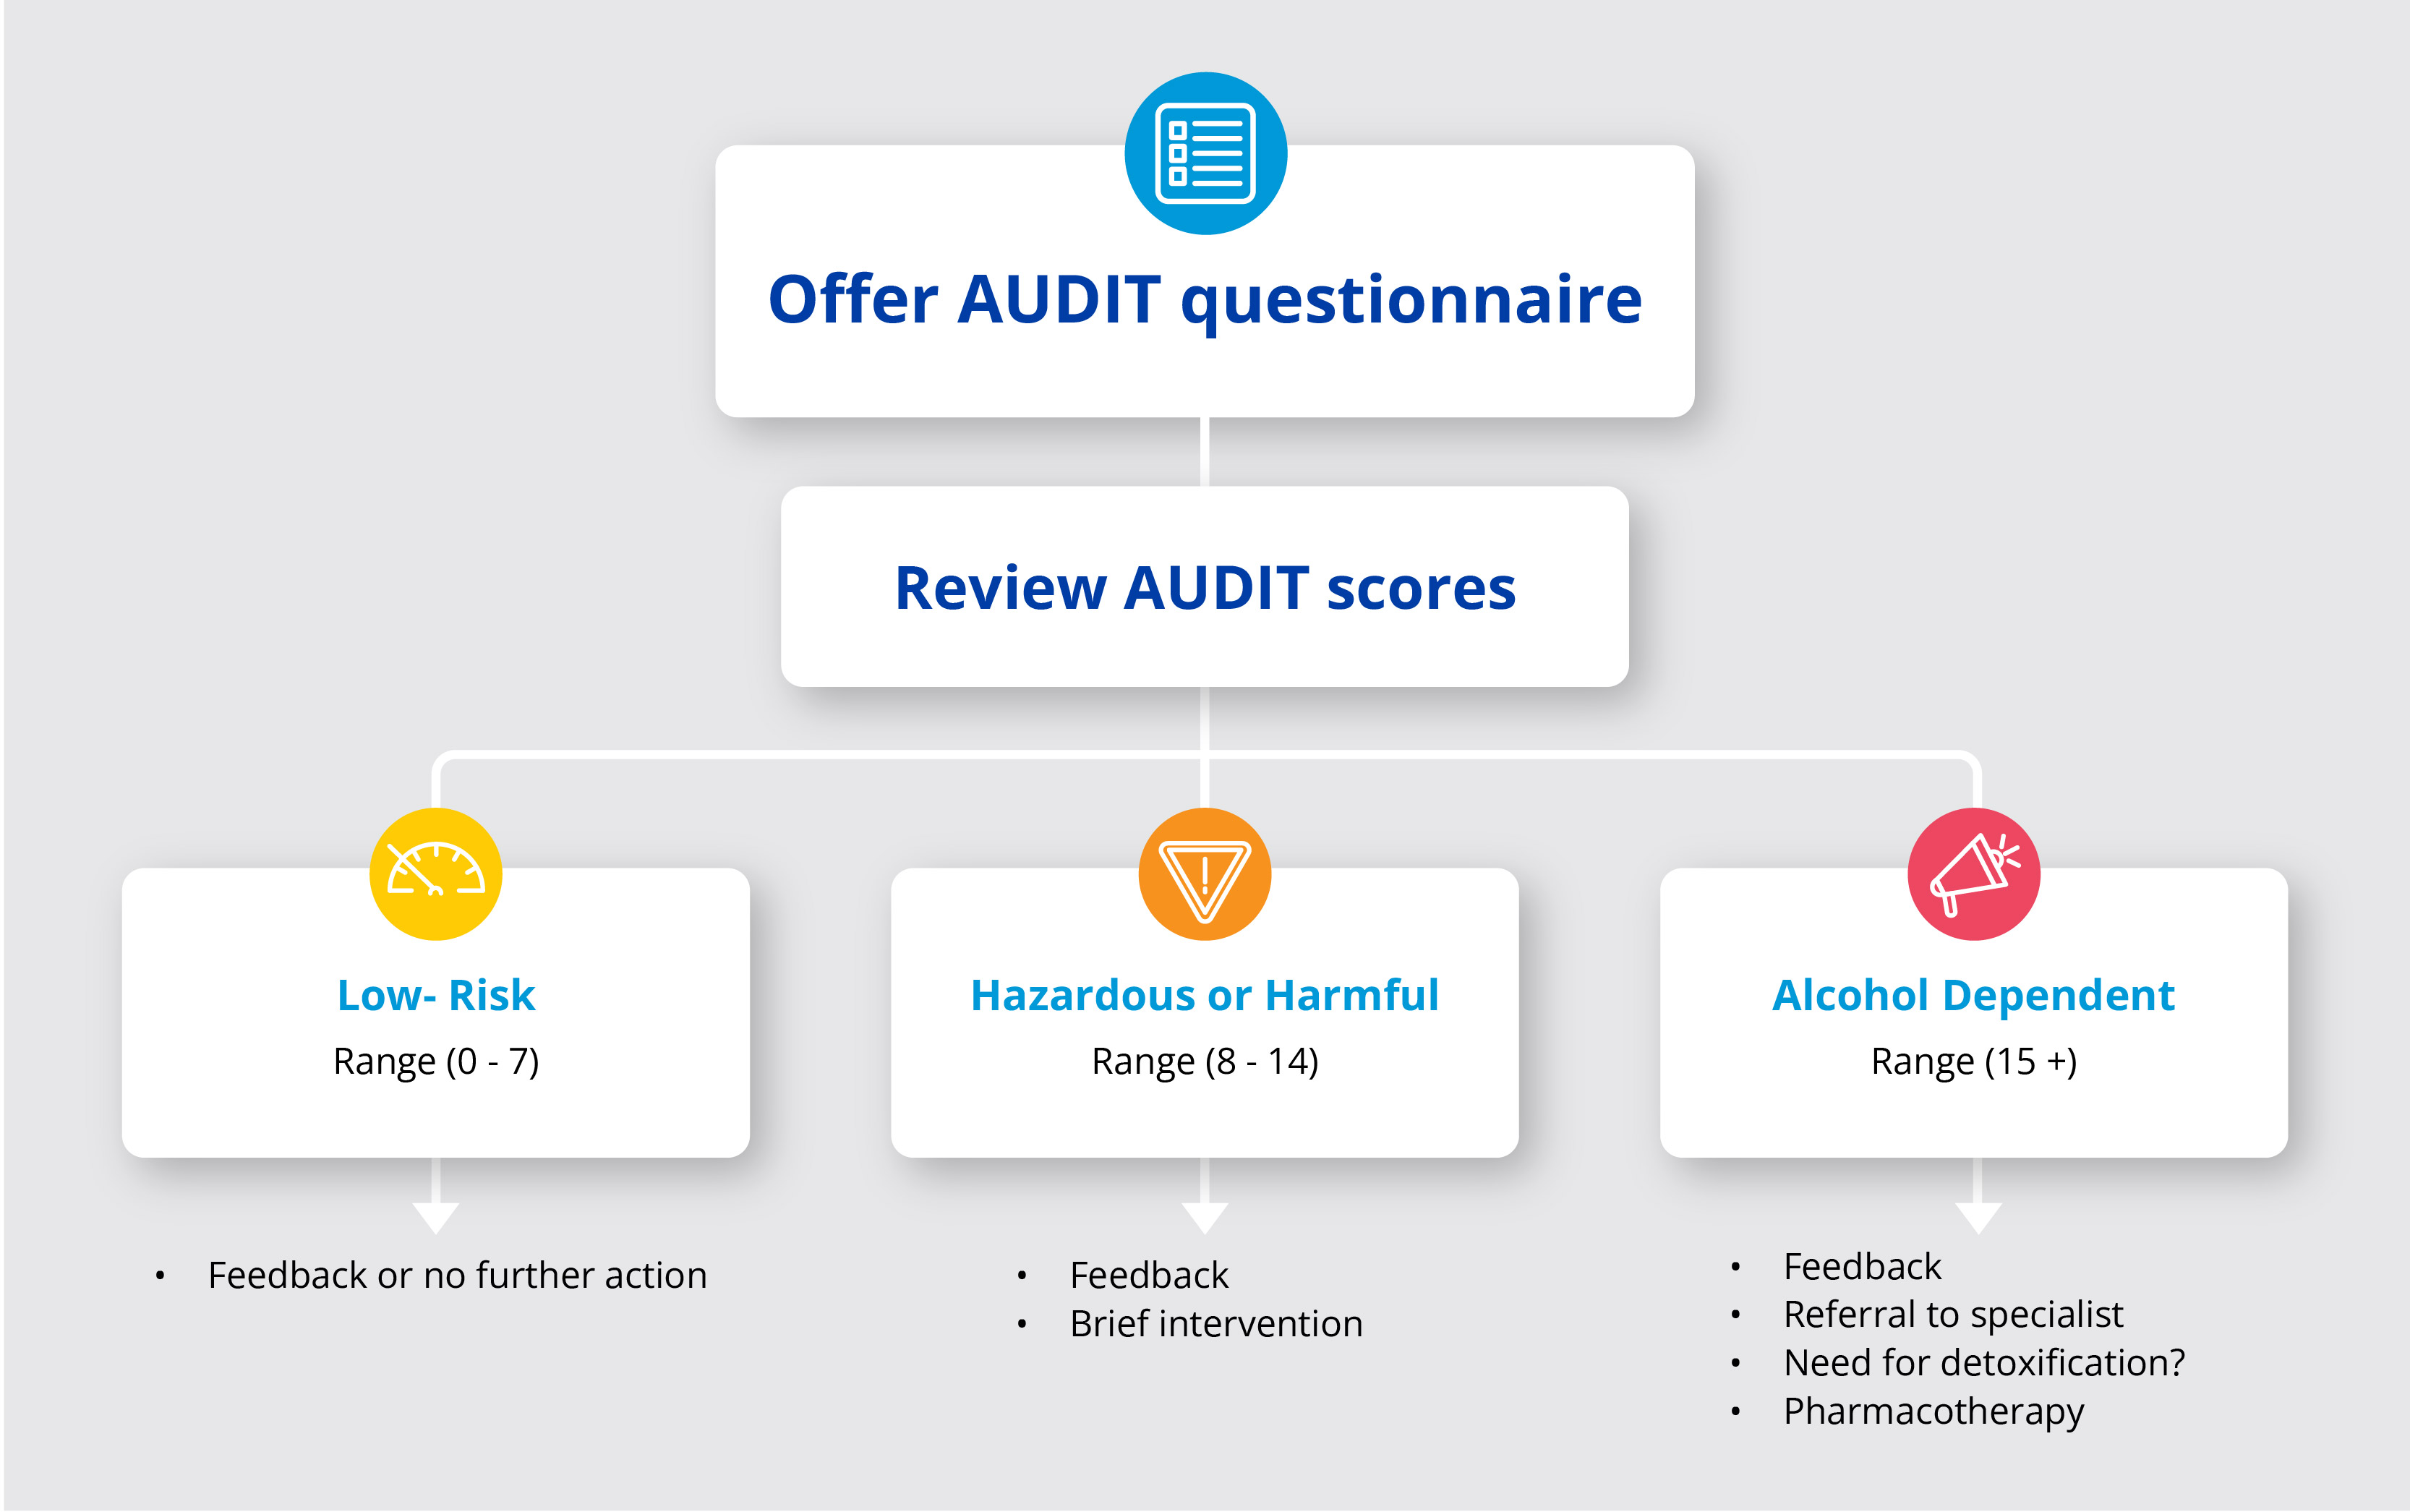 Offer AUDIT questionnaire > Review AUDIT Scores Low Risk (range 0-7) - Feedback no further action Hazardous or Harmful (range 8-14) - Feedback, Brief intervention Alcohol Dependent (range 15+) - Feedback, Referral to a specialist, Need for detoxification?, Pharmacotherapy 